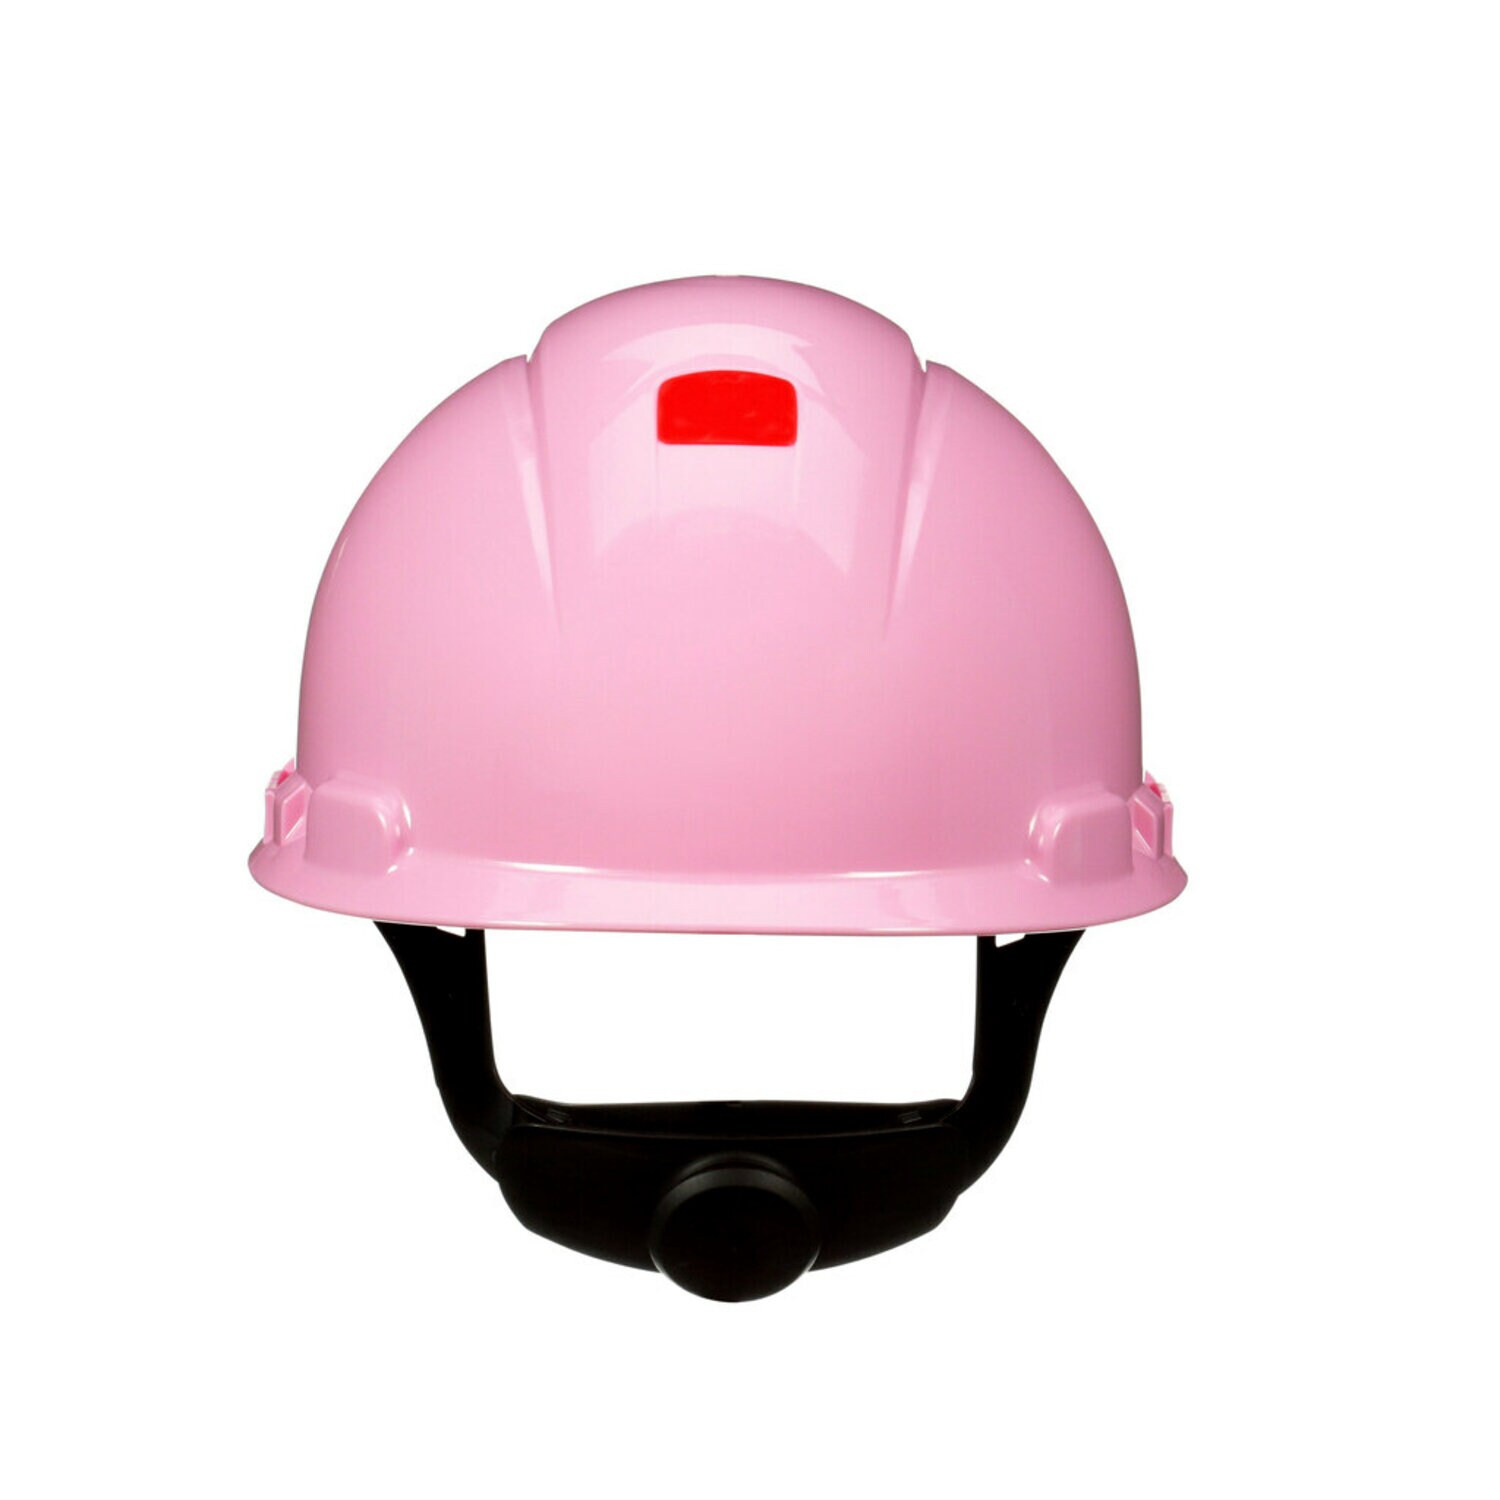 7100240002 - 3M SecureFit Hard Hat H-713SFR-UV, Pink, 4-Point pressure Diffusion Ratchet Suspension, with Uvicator, 20 ea/Case